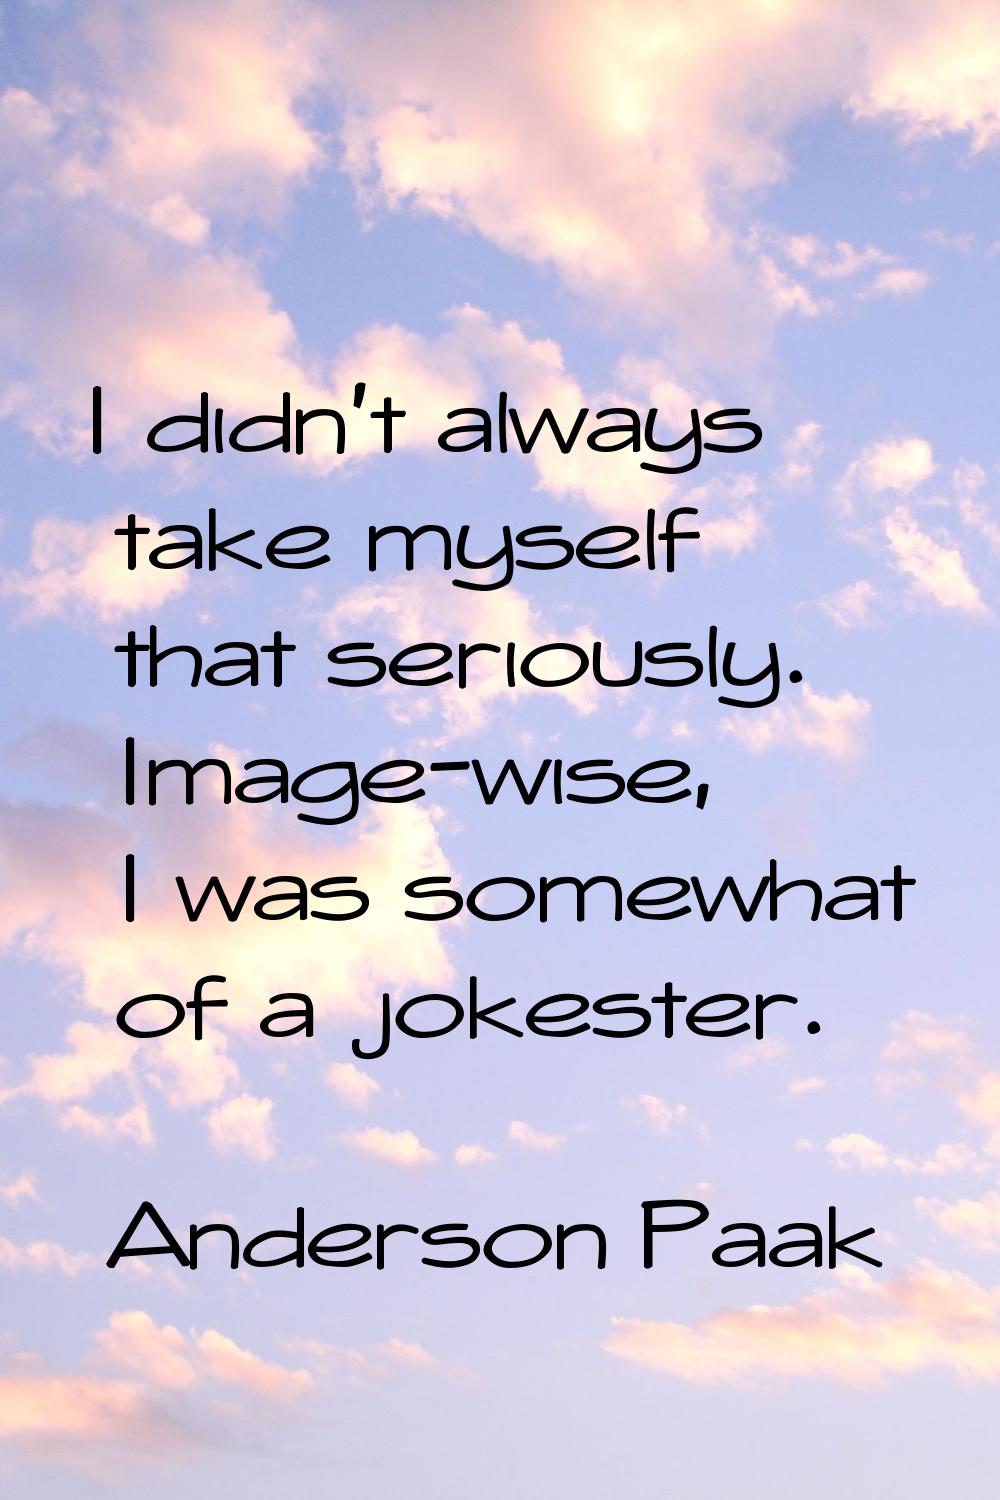 I didn't always take myself that seriously. Image-wise, I was somewhat of a jokester.